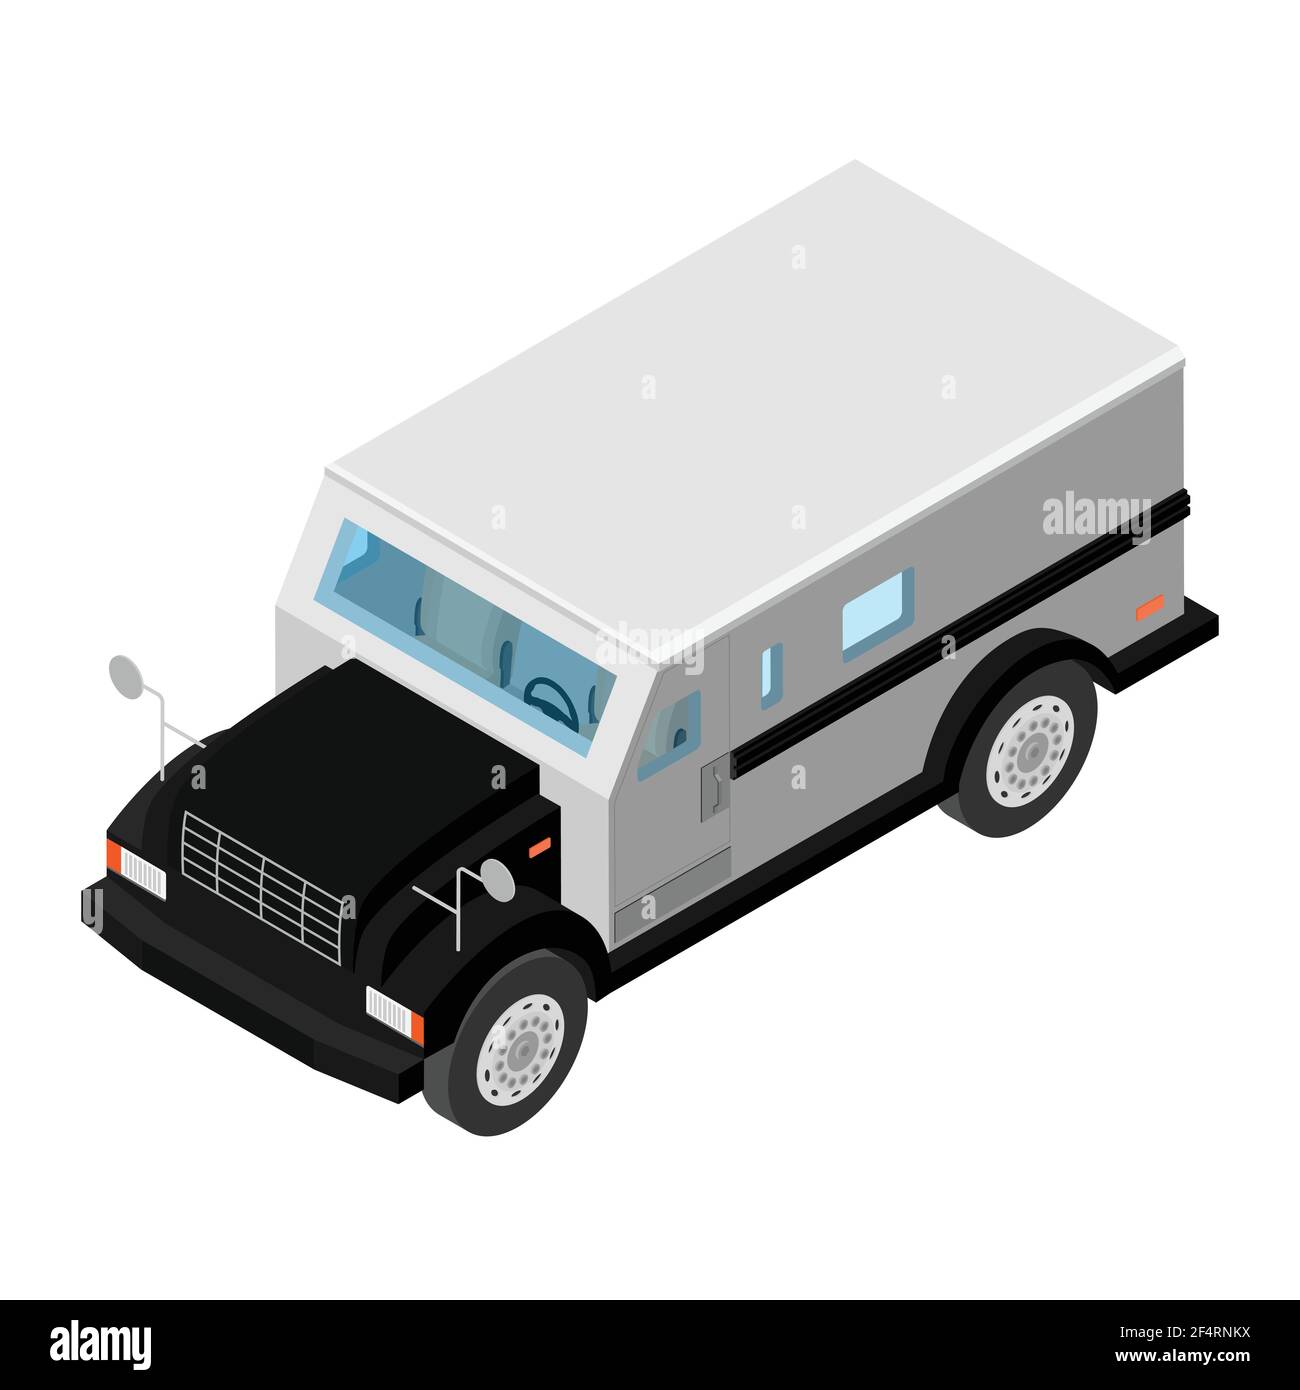 Armored cash truck isometric view. Utility security van vehicle. Vector Stock Vector